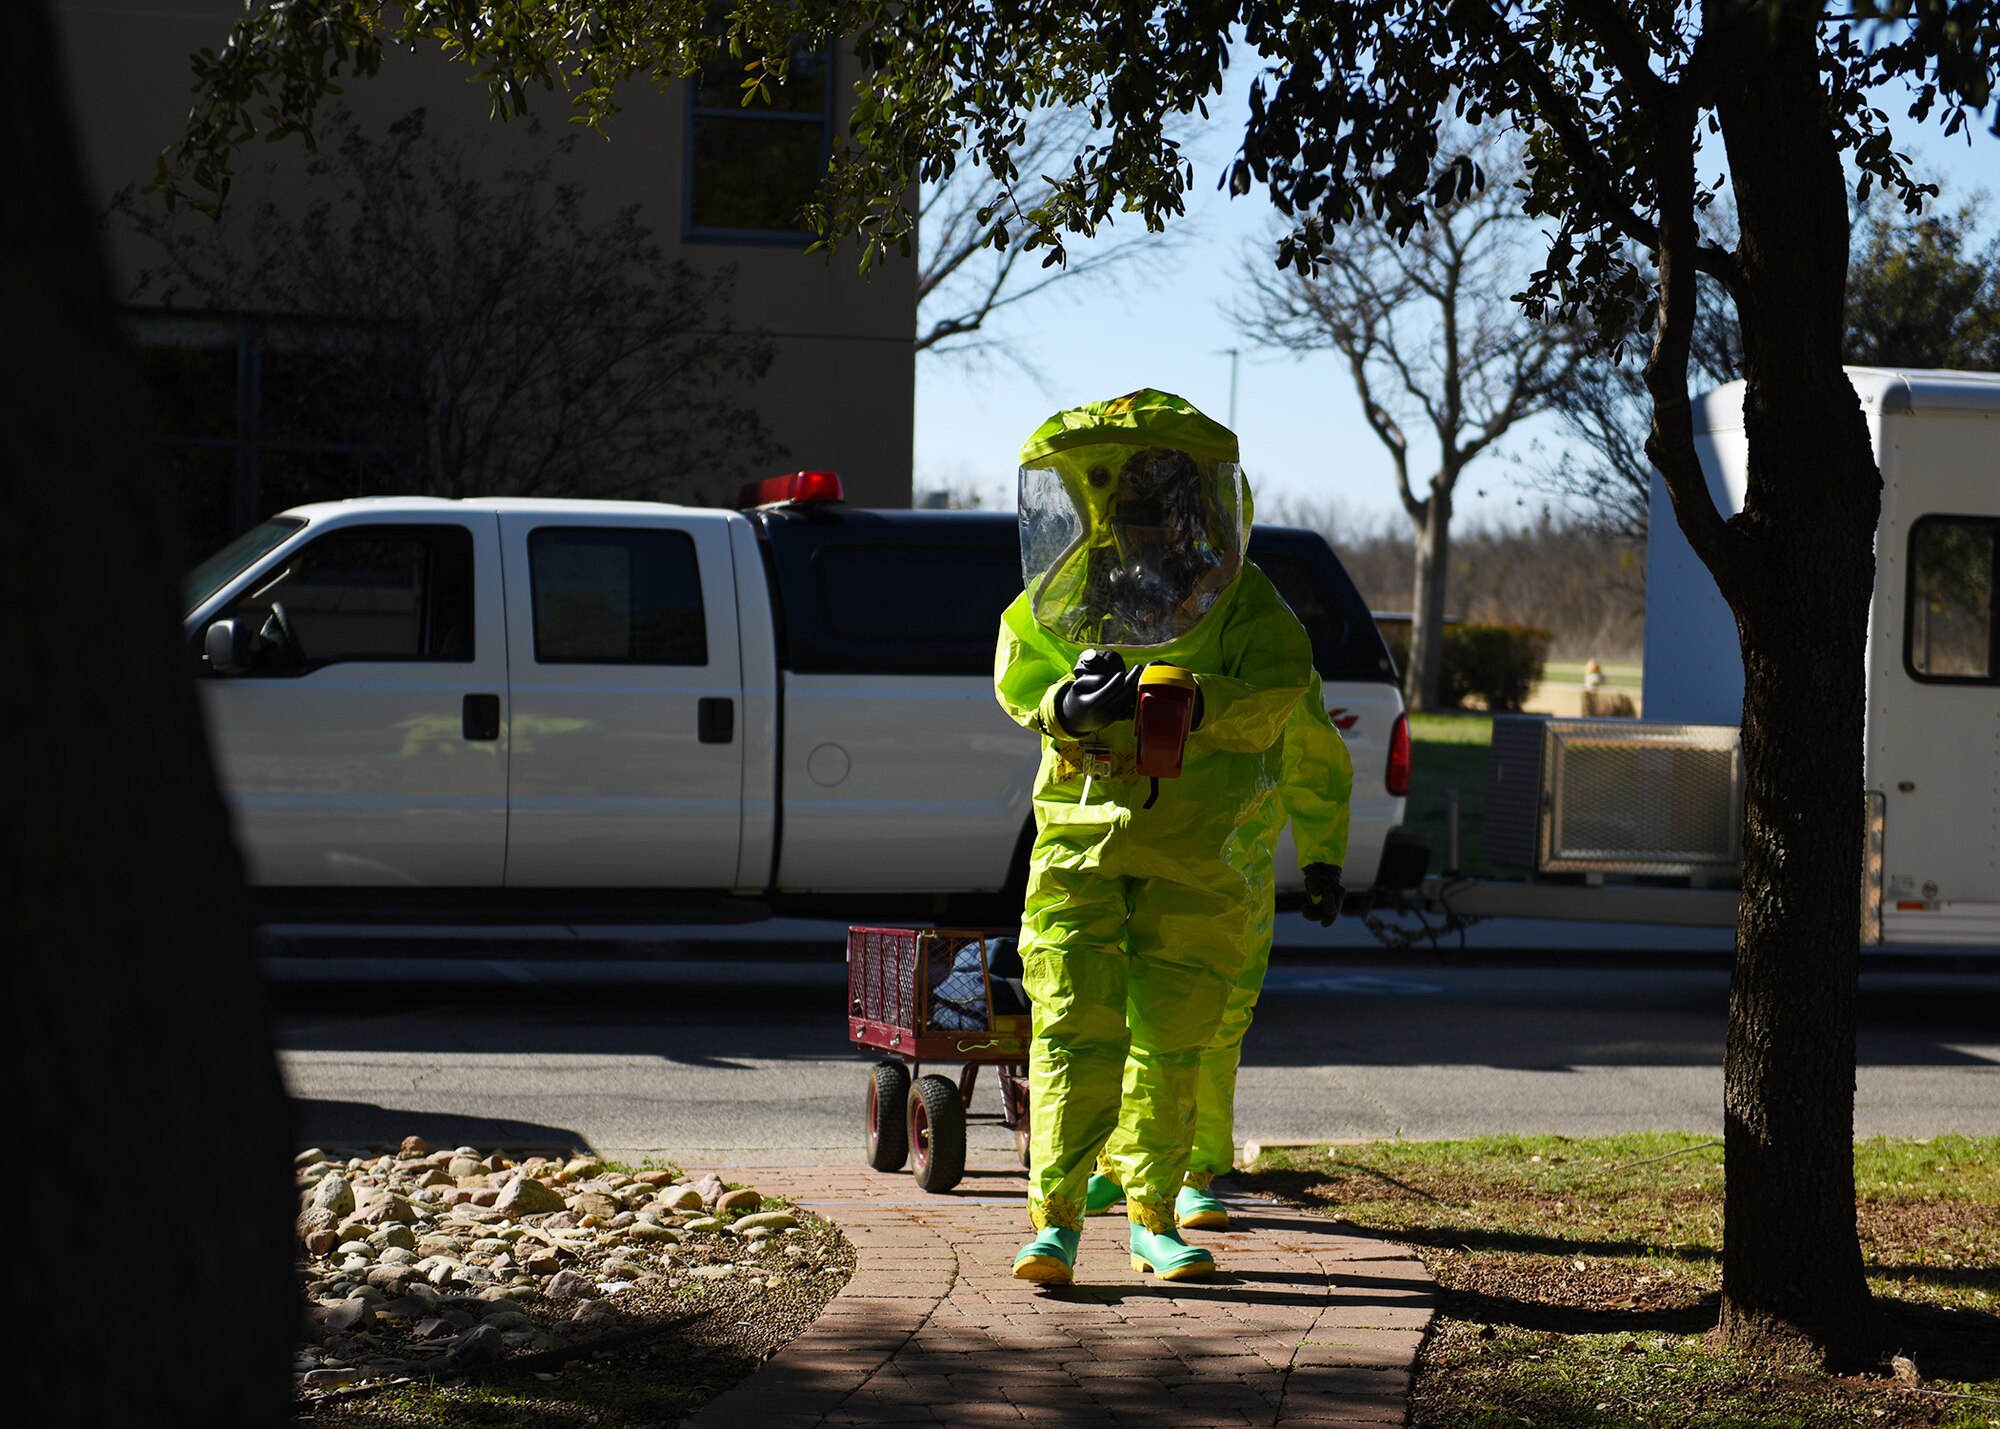 Airman Omar Thompson, 7th Operational Medical Readiness Squadron bioenvironmental engineering technician, walks towards a simulated explosion site during the 7th Medical Group’s chemical, biological, radiological, and nuclear exercise at Dyess Air Force Base, Texas, March 6, 2020.